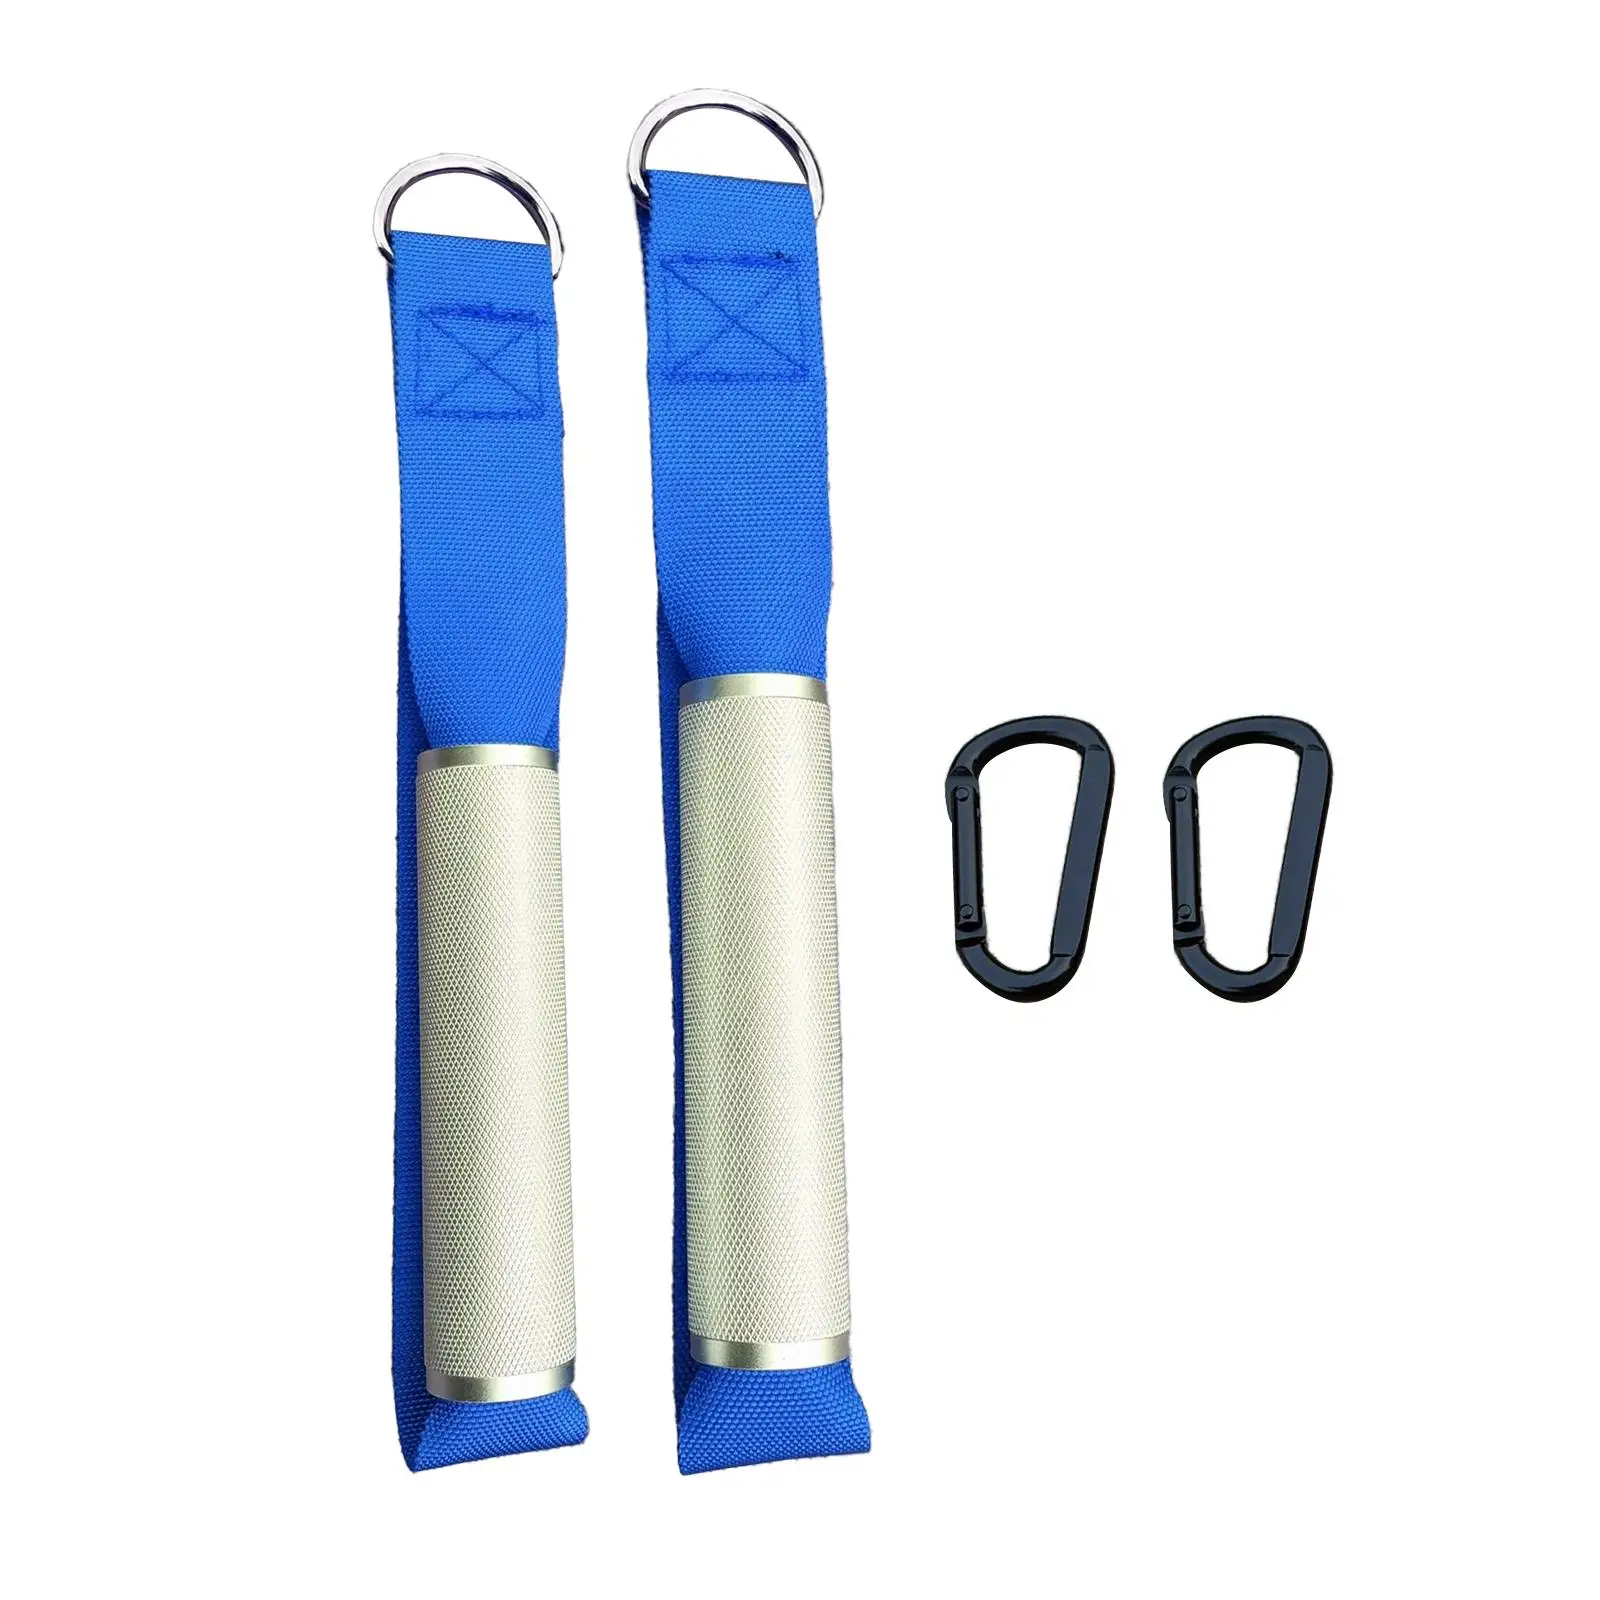 2x Gym Handles Gymnastics Hanging LAT Row Bar Resistance Exercise Accs Exercise Equipment for Yoga Pilates Strength Trainer